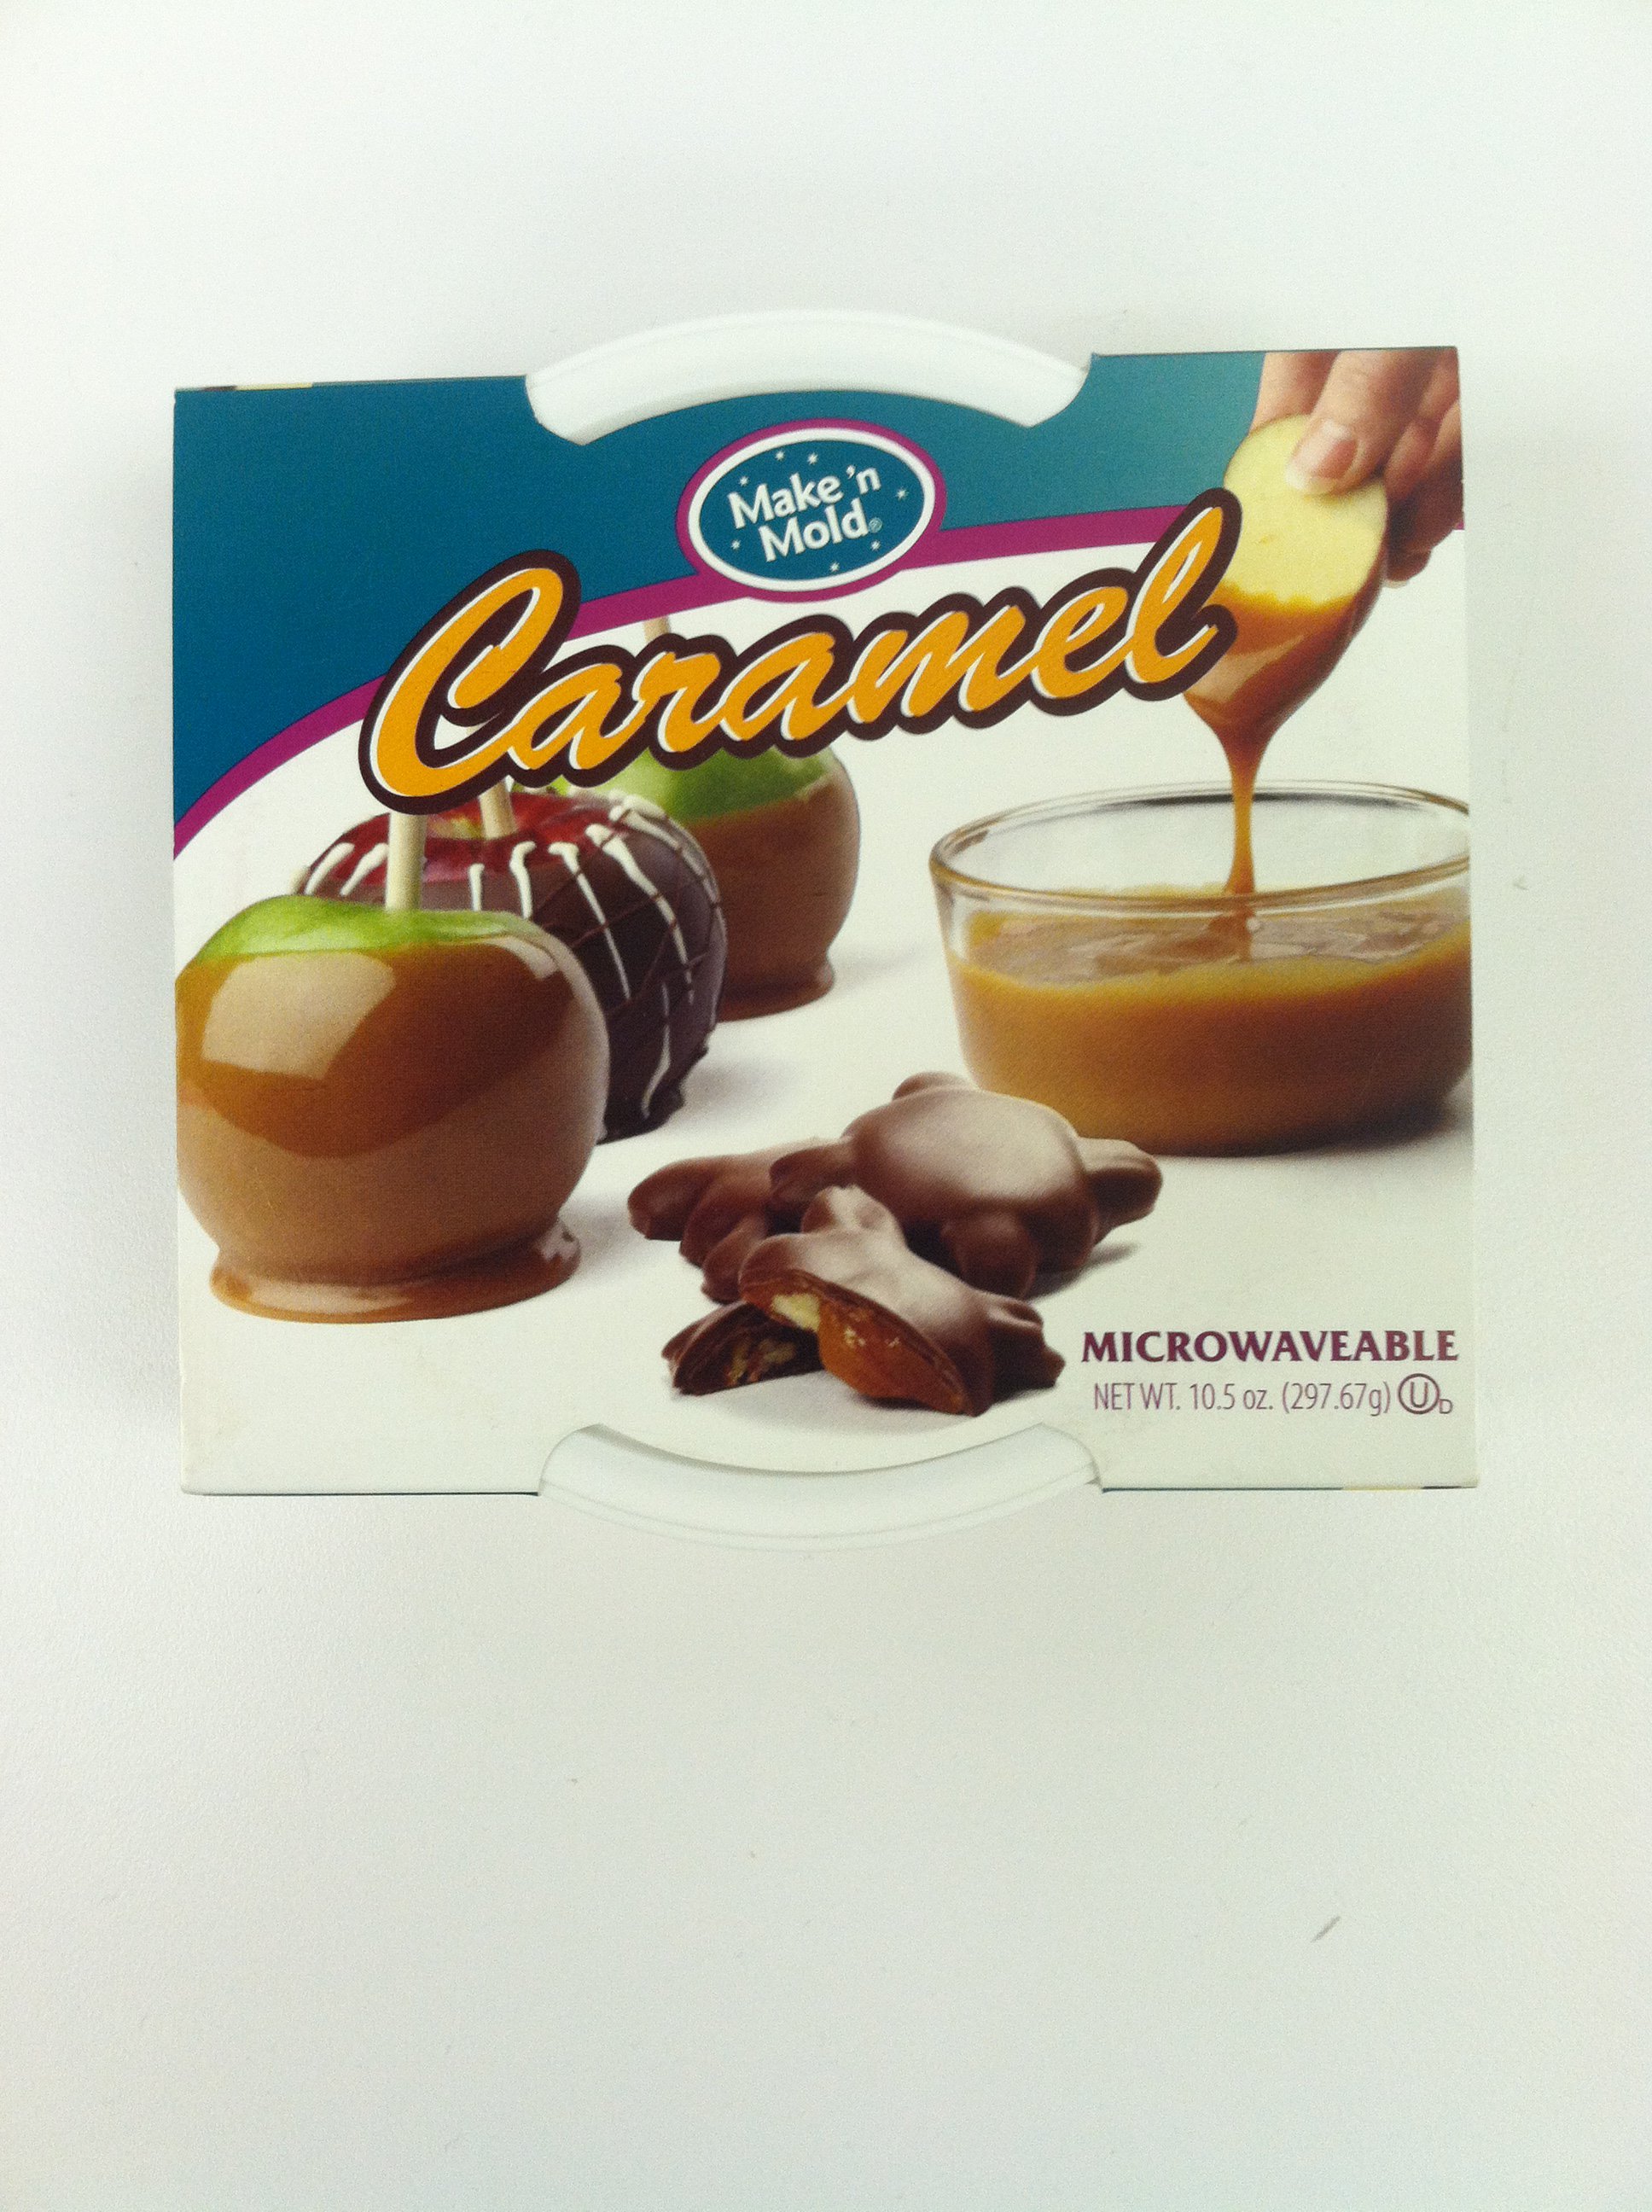 Make 'n Mold Microwavable Caramel Cup - Shop Baking Chocolate & Candies at  H-E-B